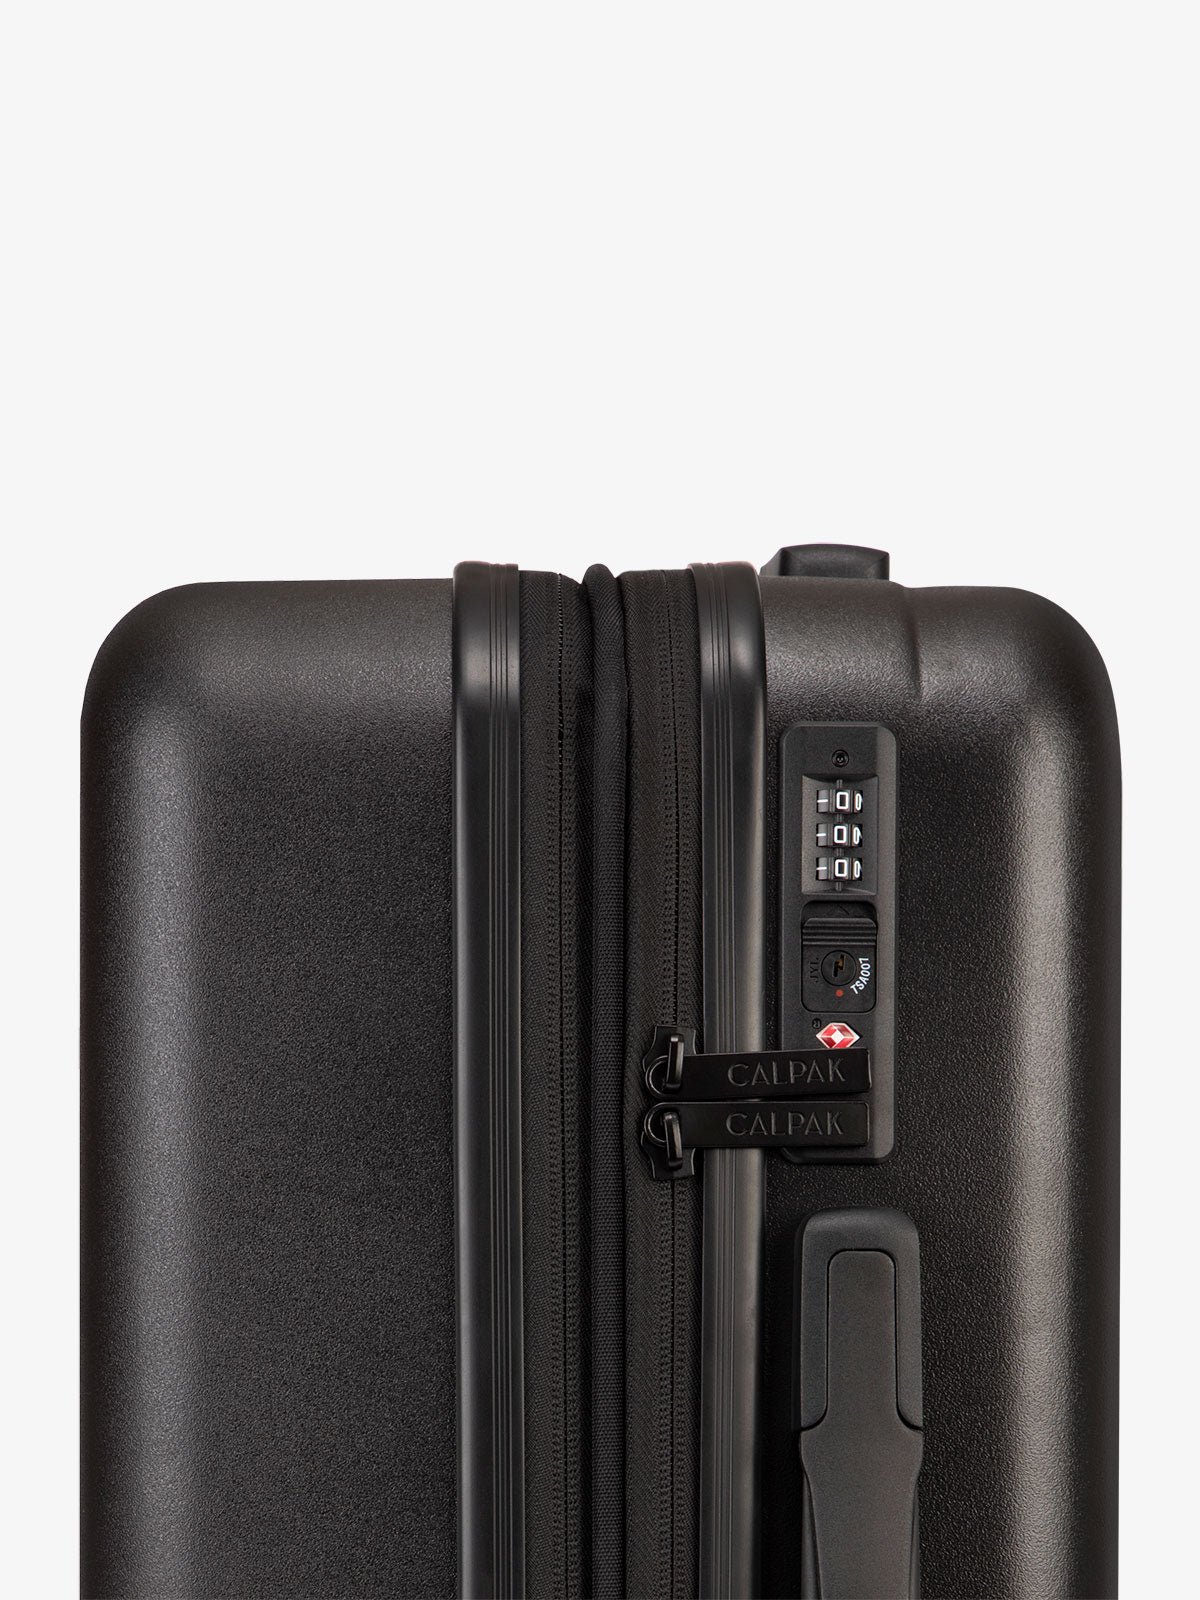 Black CALPAK Evry Carry-On Luggage with TSA-approved lock